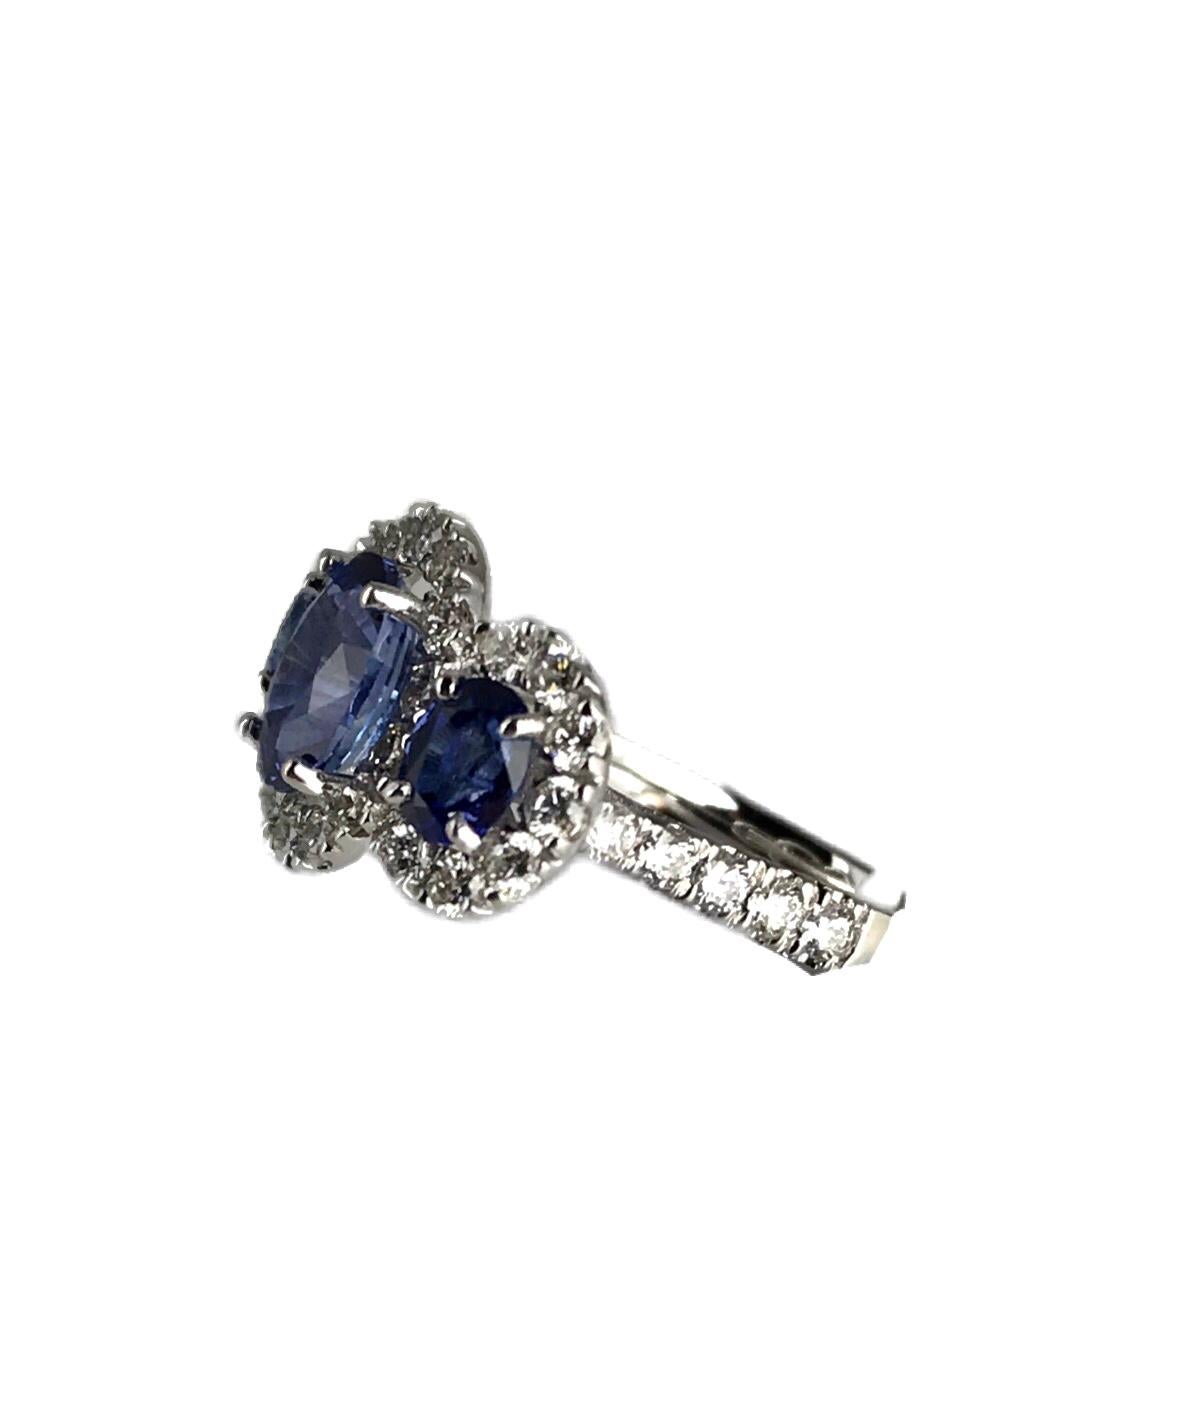 This classic ring features three oval cut sapphires totaling 2.45 carats, each inside a halo of round white diamonds.

Total sapphire weight 2.45 carats.
Total diamond weight 0.91 carats.
Set in 18k White Gold

This ring can be professionally